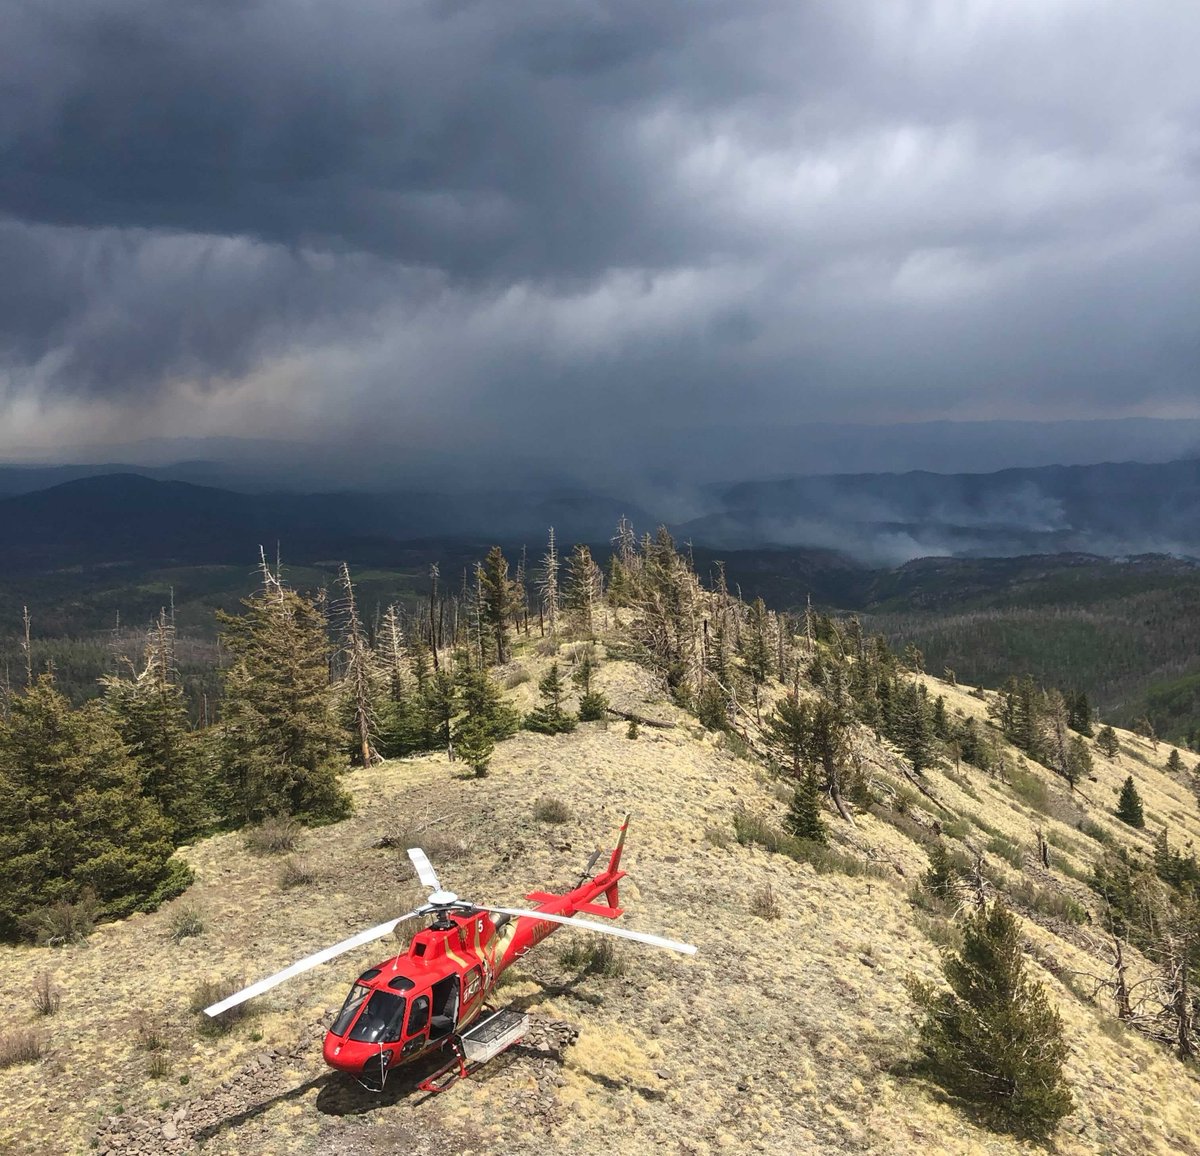 Mission Alert - 🚁Copter 5 on a repeater mission assisting with the Johnson Fire in the Gila National Forest located in New Mexico. #utilityhelicopter #aviationphotography #helicopter #aviationdaily #instagramaviation #gilanationalforest #firefighter